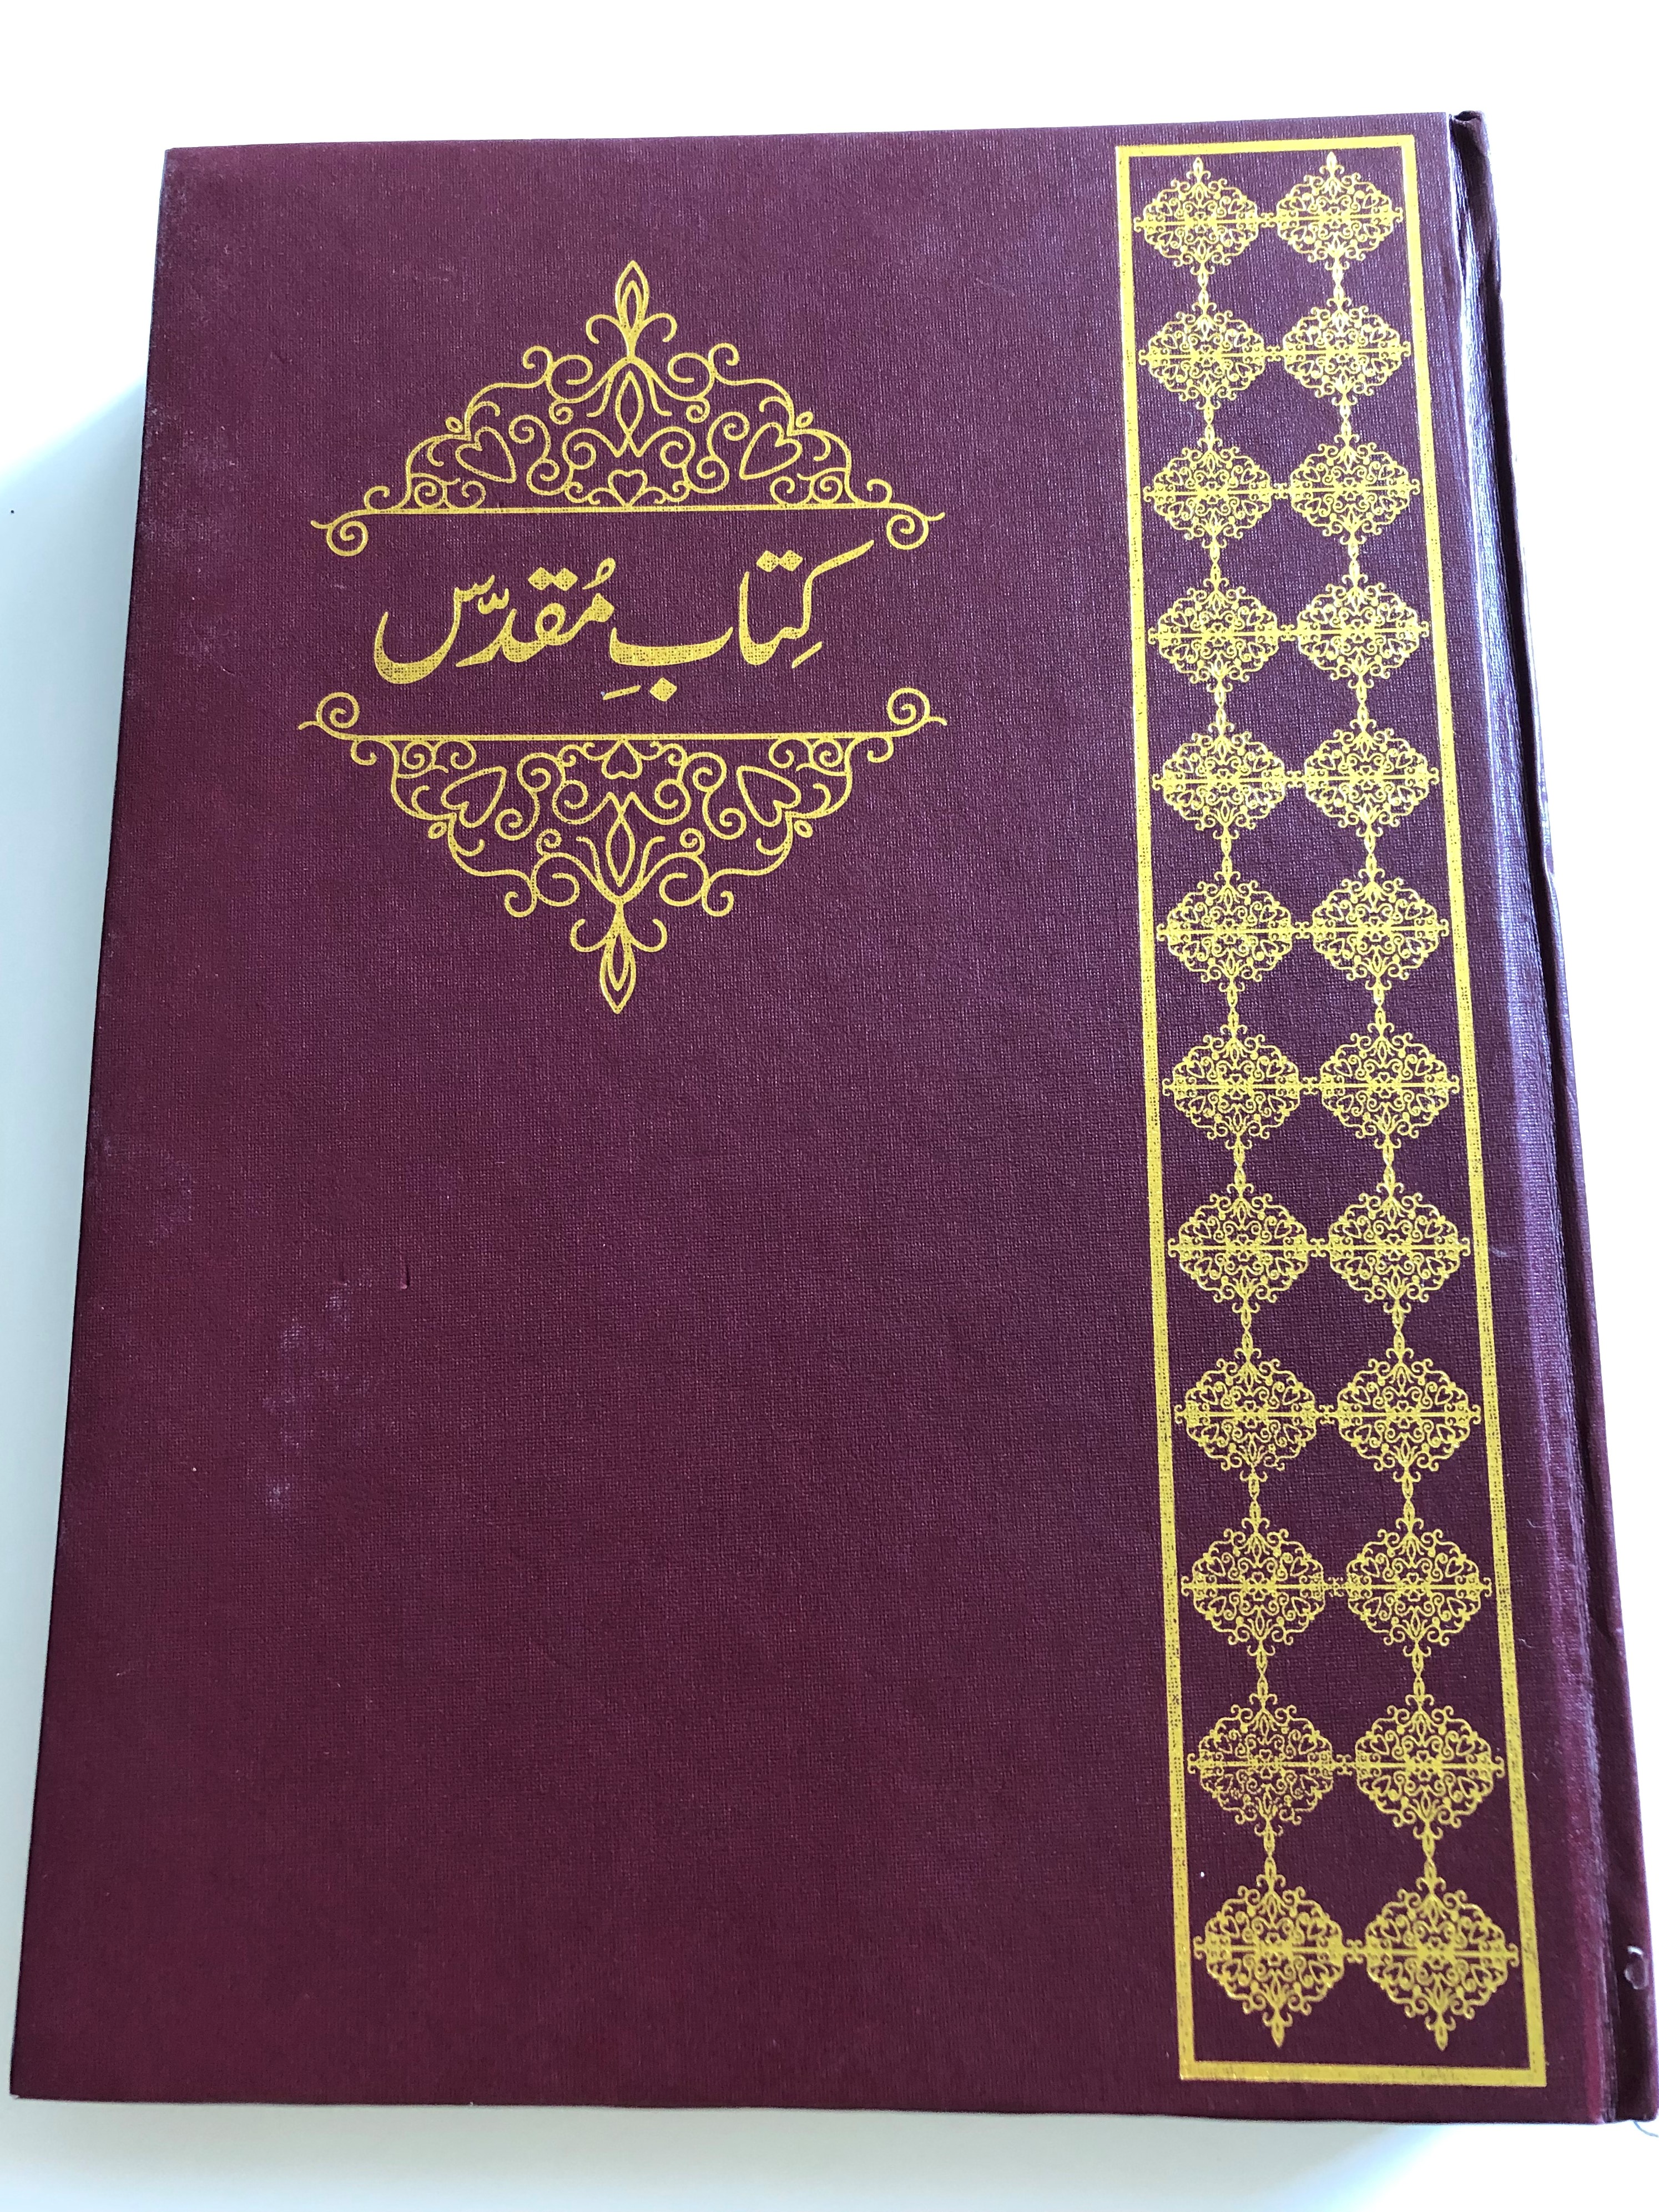 holy-bible-in-urdu-large-print-revised-version-pakistan-bible-society-2018-hardcover-burgundy-double-column-text-with-maps-and-diagrams-2-ribbon-bookmarks-god-s-word-living-hope-for-all-1-.jpg